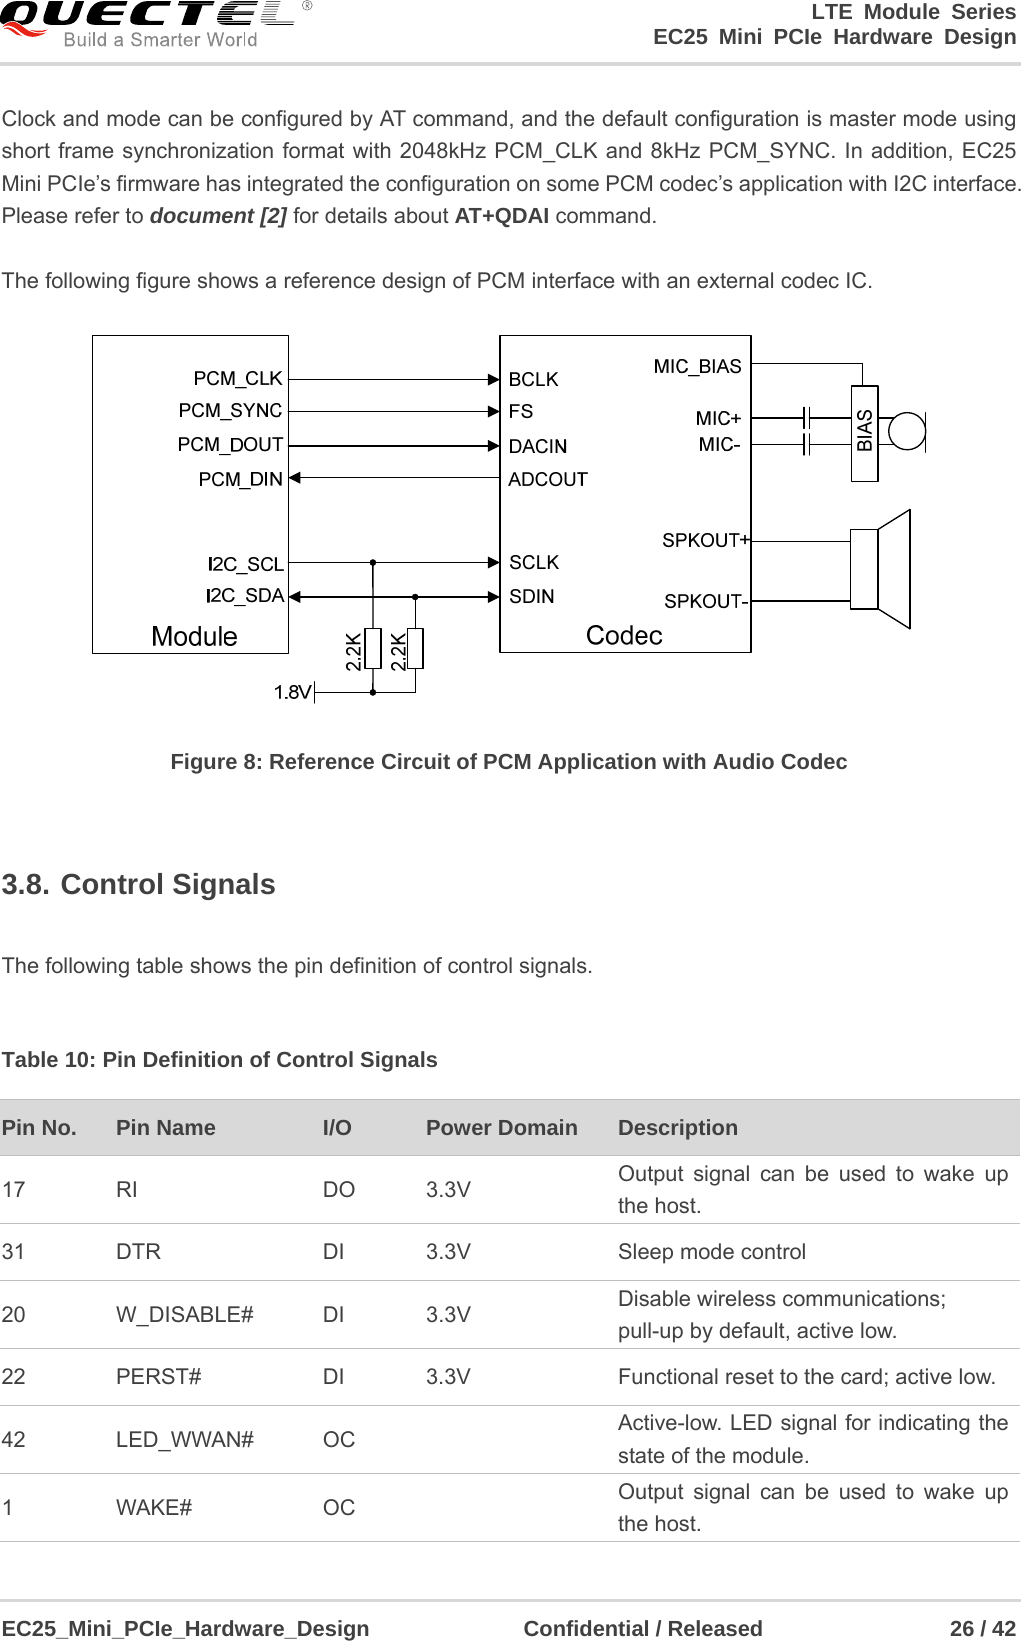                                        LTE Module Series                                                  EC25 Mini PCIe Hardware Design  EC25_Mini_PCIe_Hardware_Design              Confidential / Released                 26 / 42    Clock and mode can be configured by AT command, and the default configuration is master mode using short frame synchronization format with 2048kHz PCM_CLK and 8kHz PCM_SYNC. In addition, EC25 Mini PCIe’s firmware has integrated the configuration on some PCM codec’s application with I2C interface. Please refer to document [2] for details about AT+QDAI command.  The following figure shows a reference design of PCM interface with an external codec IC.  Figure 8: Reference Circuit of PCM Application with Audio Codec  3.8. Control Signals  The following table shows the pin definition of control signals.  Table 10: Pin Definition of Control Signals Pin No.  Pin Name  I/O  Power Domain    Description 17 RI  DO 3.3V  Output signal can be used to wake up the host. 31 DTR  DI 3.3V  Sleep mode control 20  W_DISABLE#  DI        3.3V  Disable wireless communications; pull-up by default, active low. 22  PERST#  DI        3.3V Functional reset to the card; active low. 42  LED_WWAN#  OC        Active-low. LED signal for indicating the state of the module. 1 WAKE#  OC  Output signal can be used to wake up the host. 